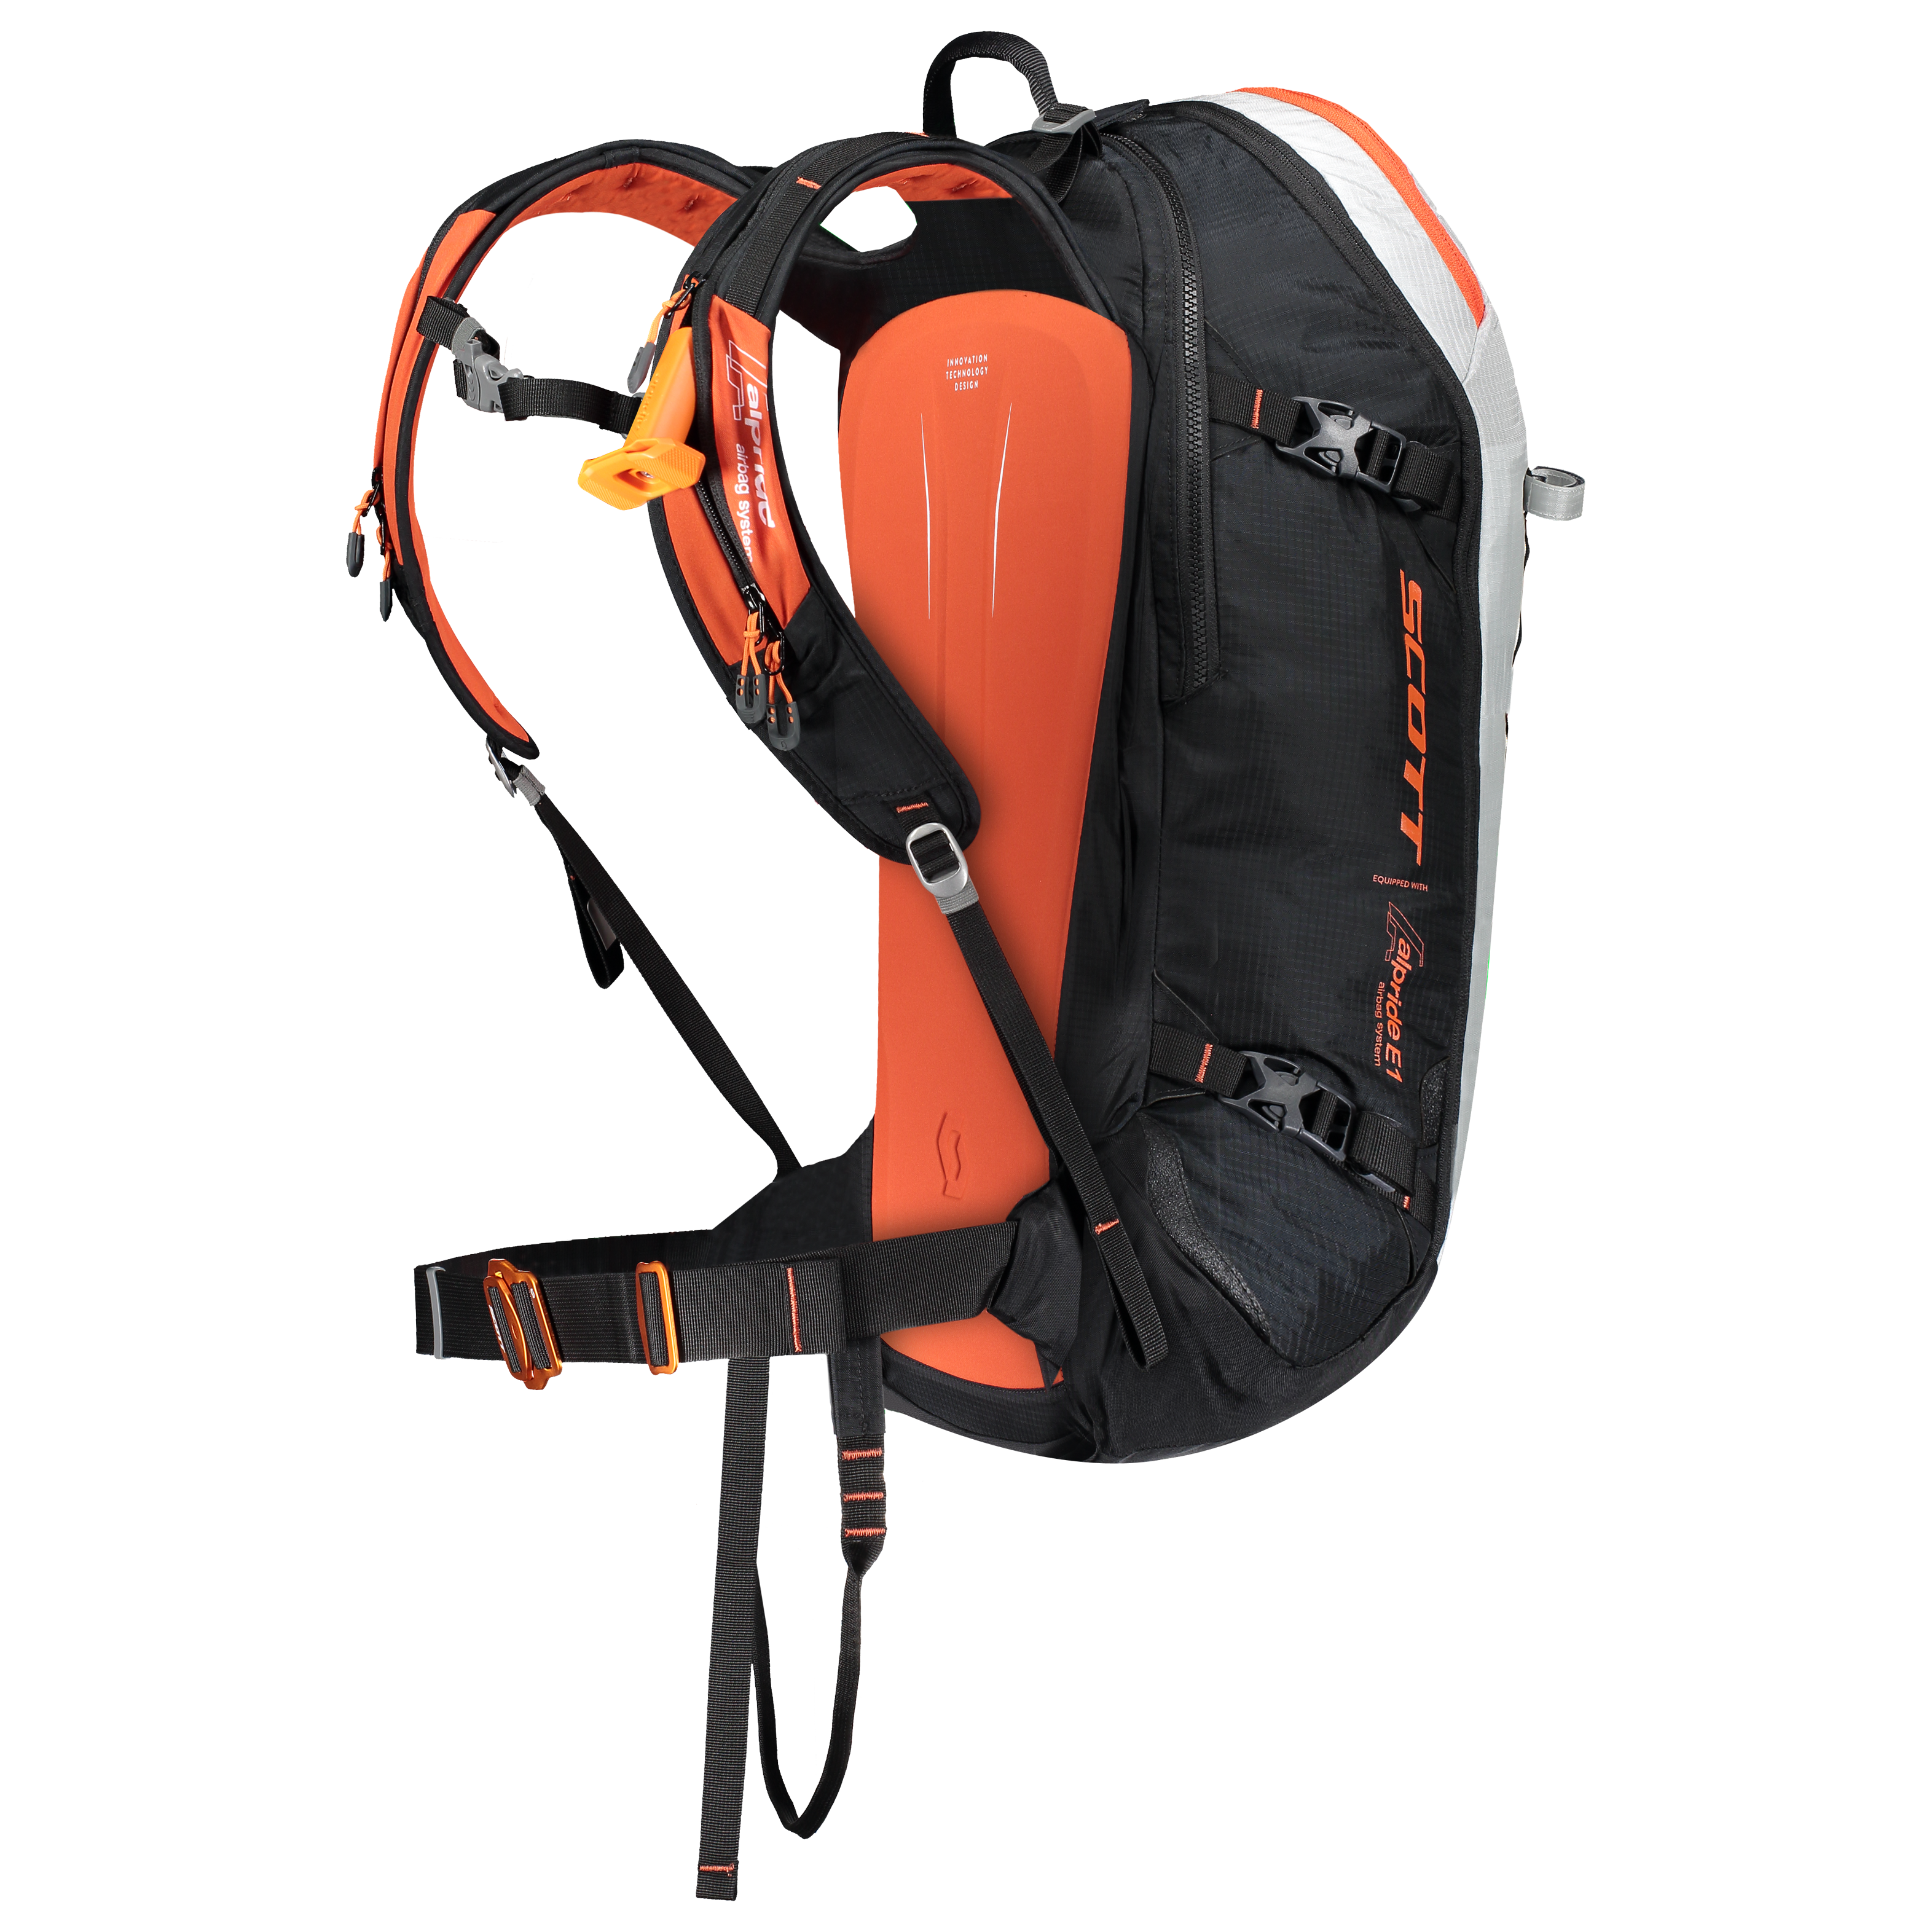 Scott Patrol E1 electronic airbag pack, avalanche airbag